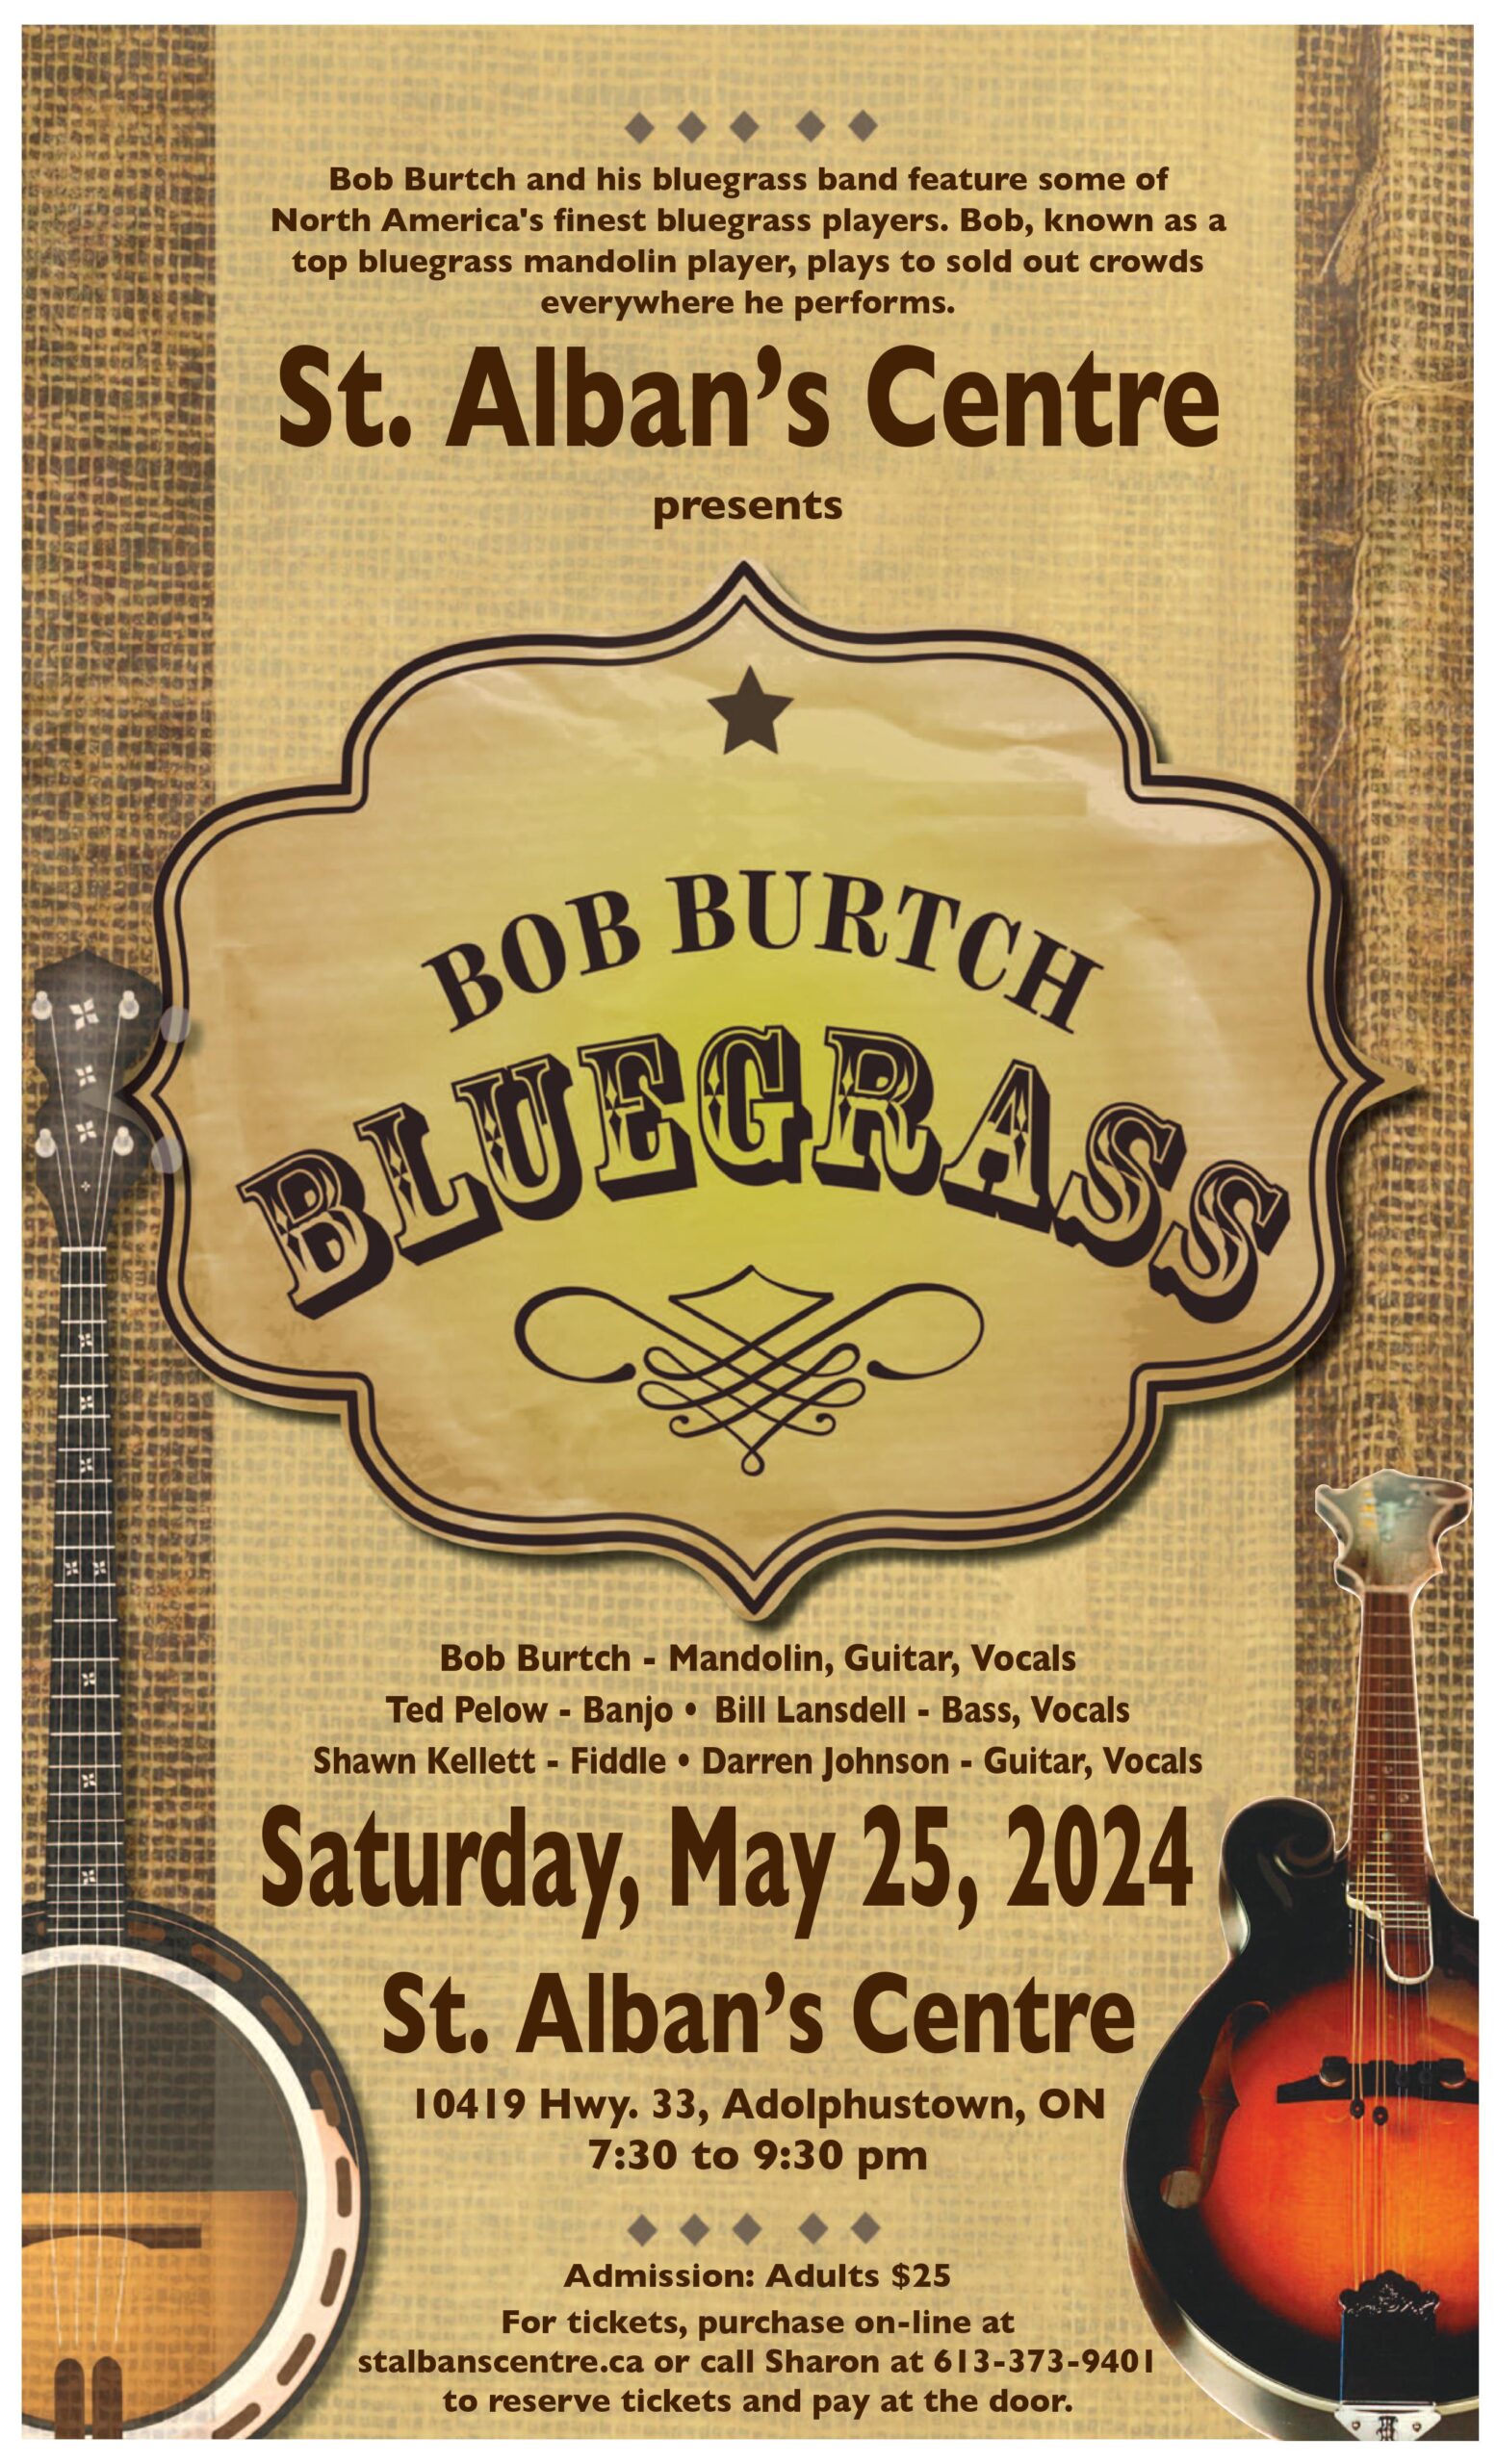 poster for event with details and drawing of bluegrass instruments.